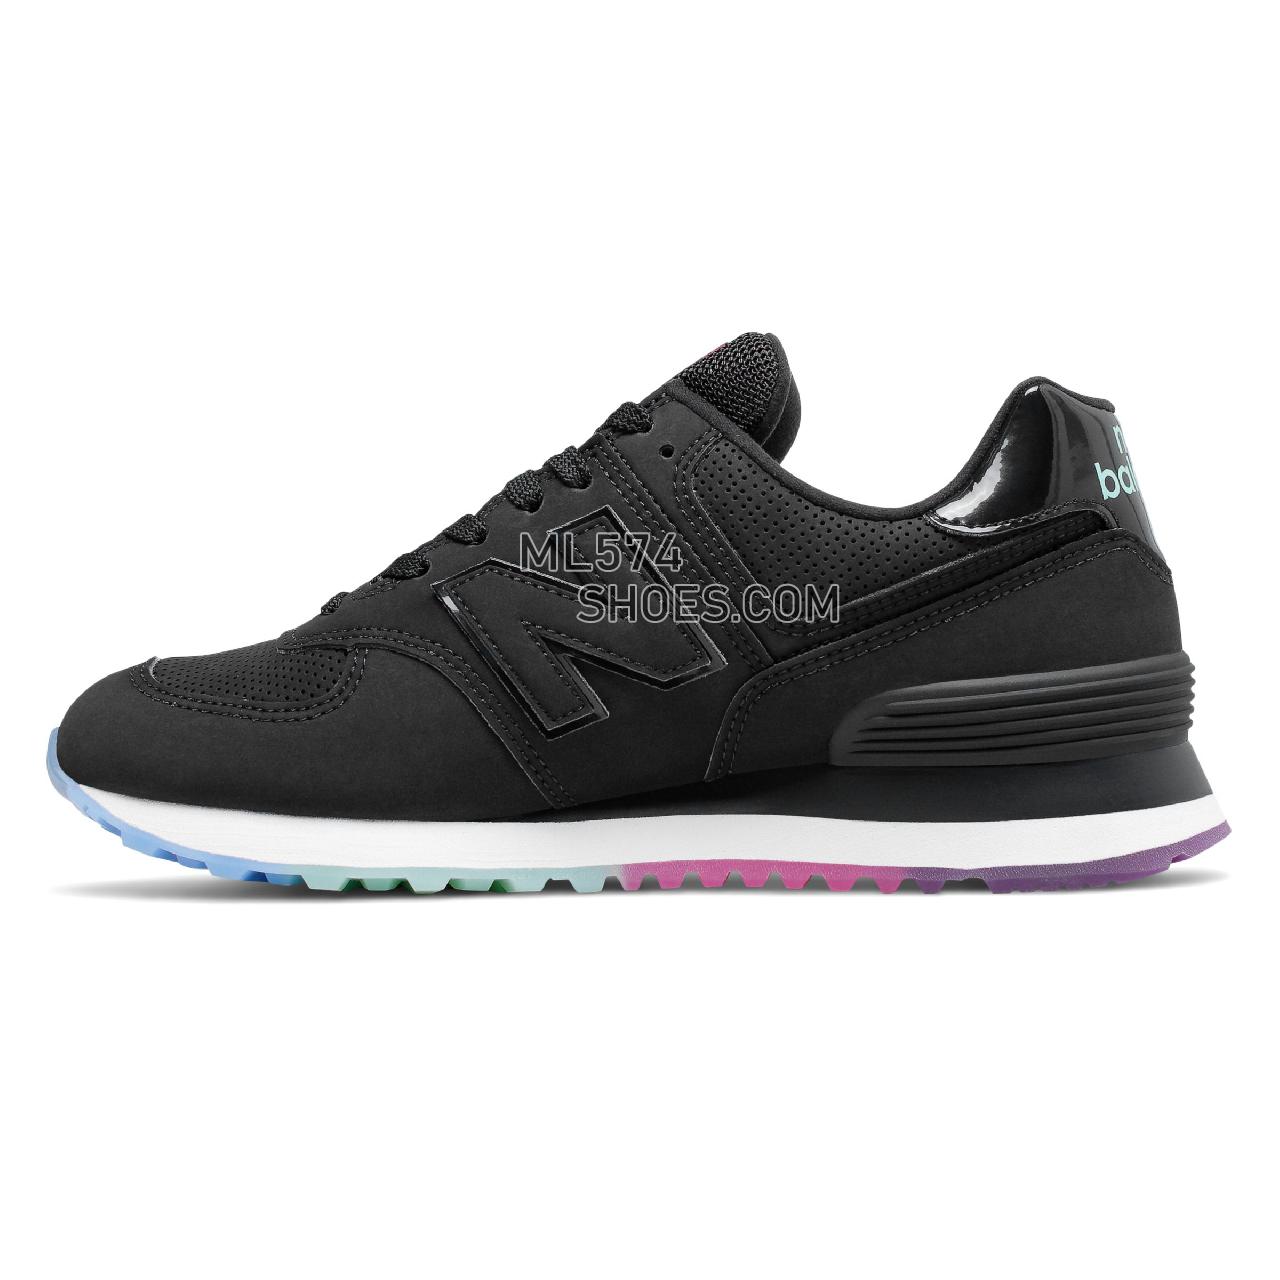 New Balance 574 - Women's Classic Sneakers - Black with Neo Mint - WL574SOO